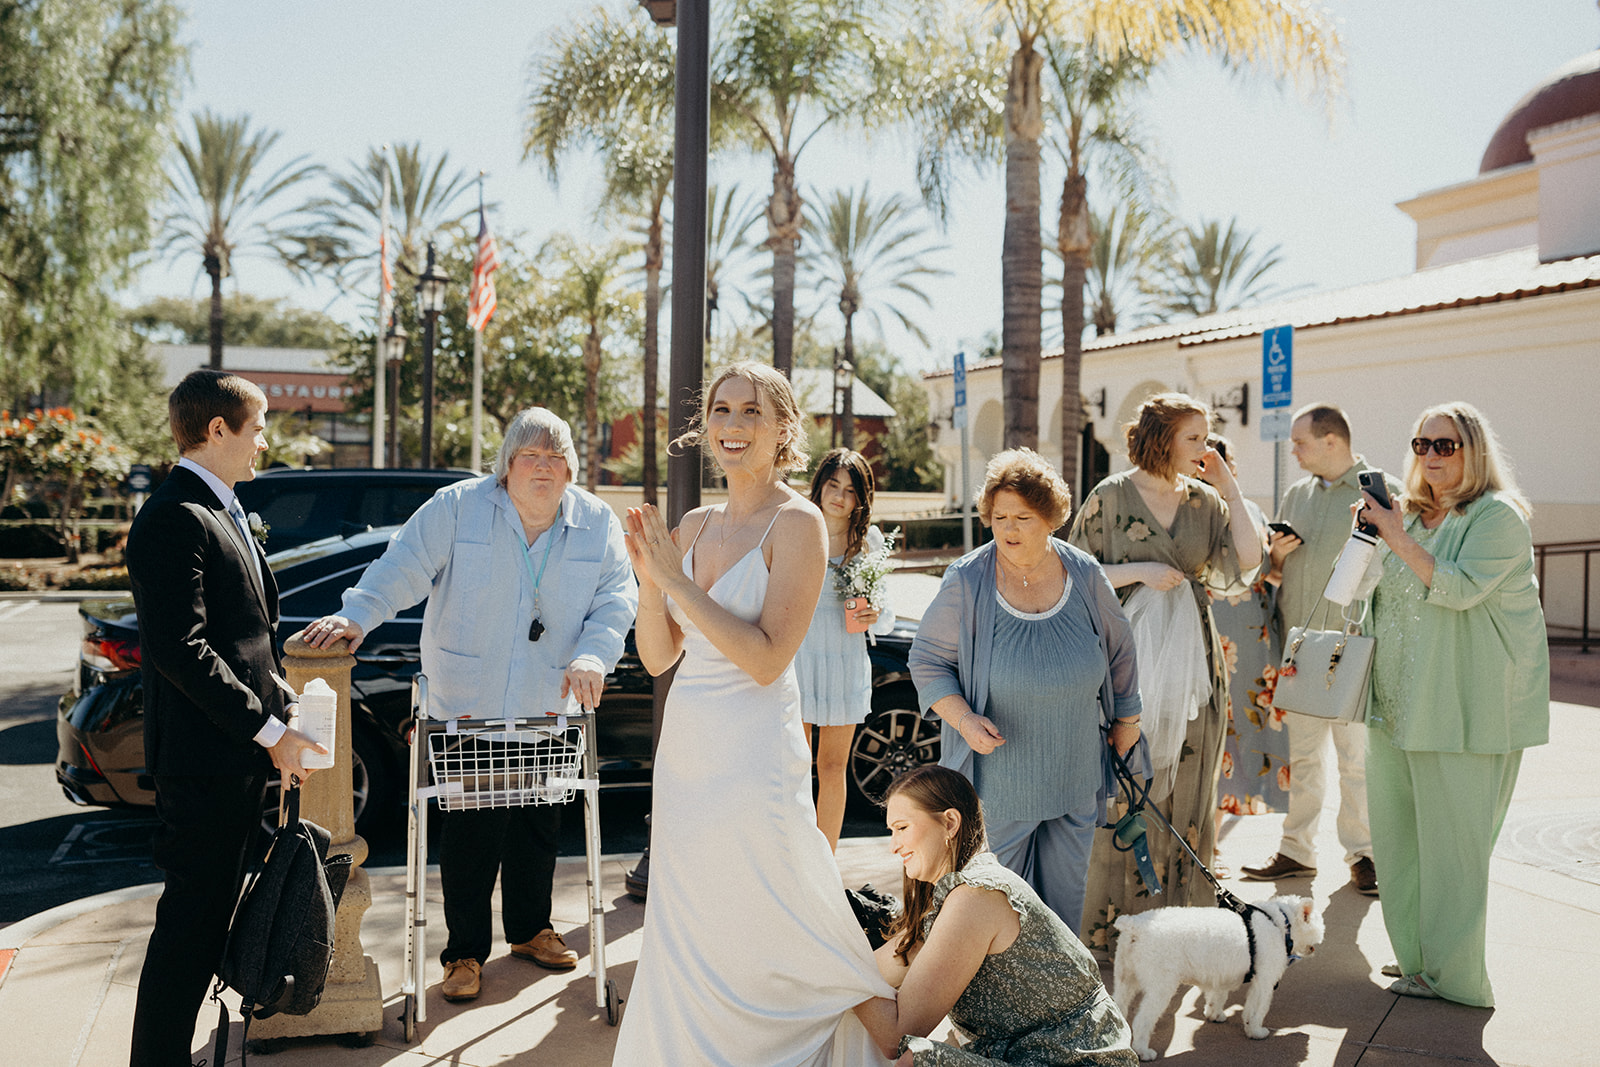 getting married at the laguna hills civic center